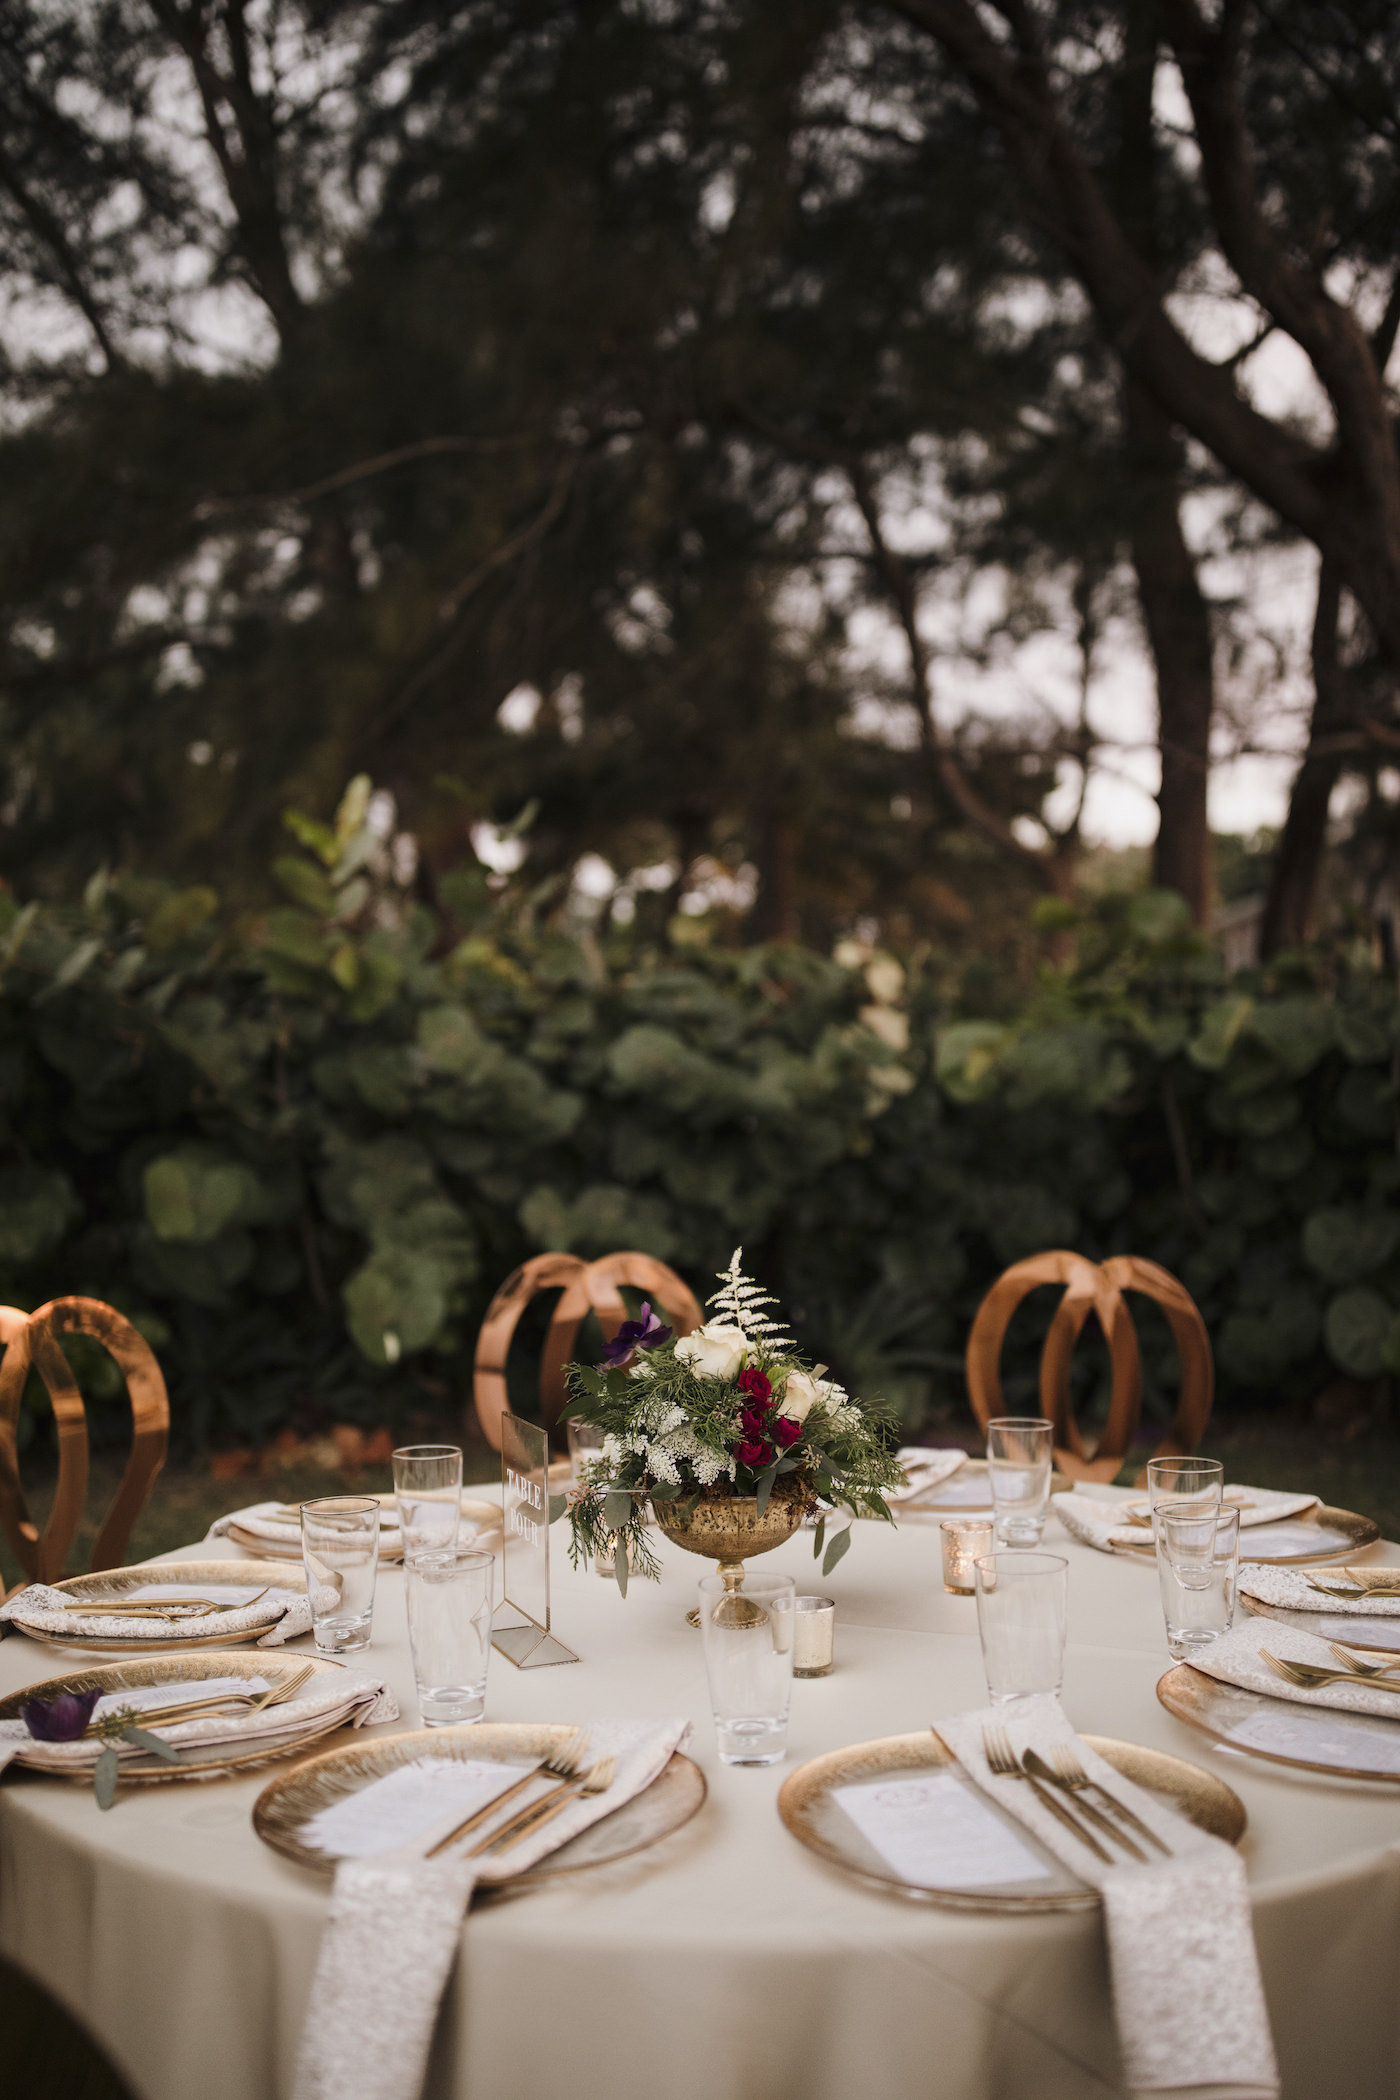 Outdoor Sarasota Beach Neutral Gold and Champagne Wedding Reception Table with Gold Glass Charger Plates and Gold Flatware and Gold King Louis Chairs | Gold Geometric Glass Frame Table Number | Gold Compote Vase Wedding Centerpiece with White and Red Flowers and Greenery